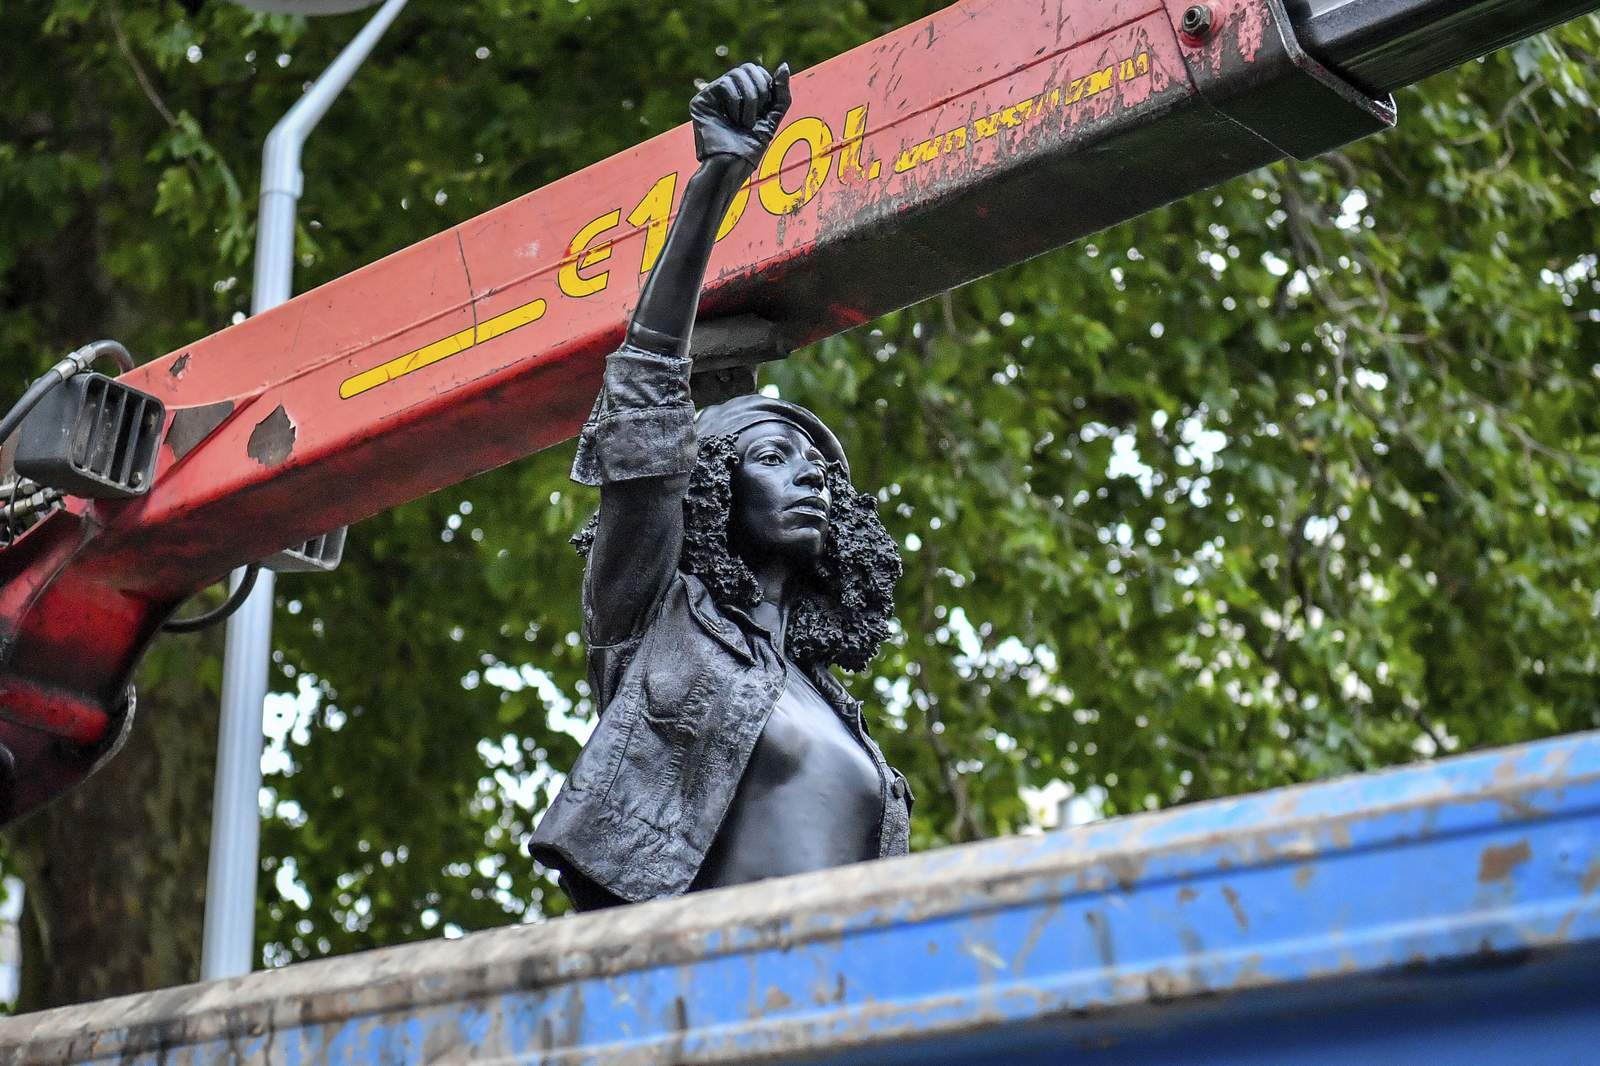 Statue of Black UK protester removed from plinth in Bristol